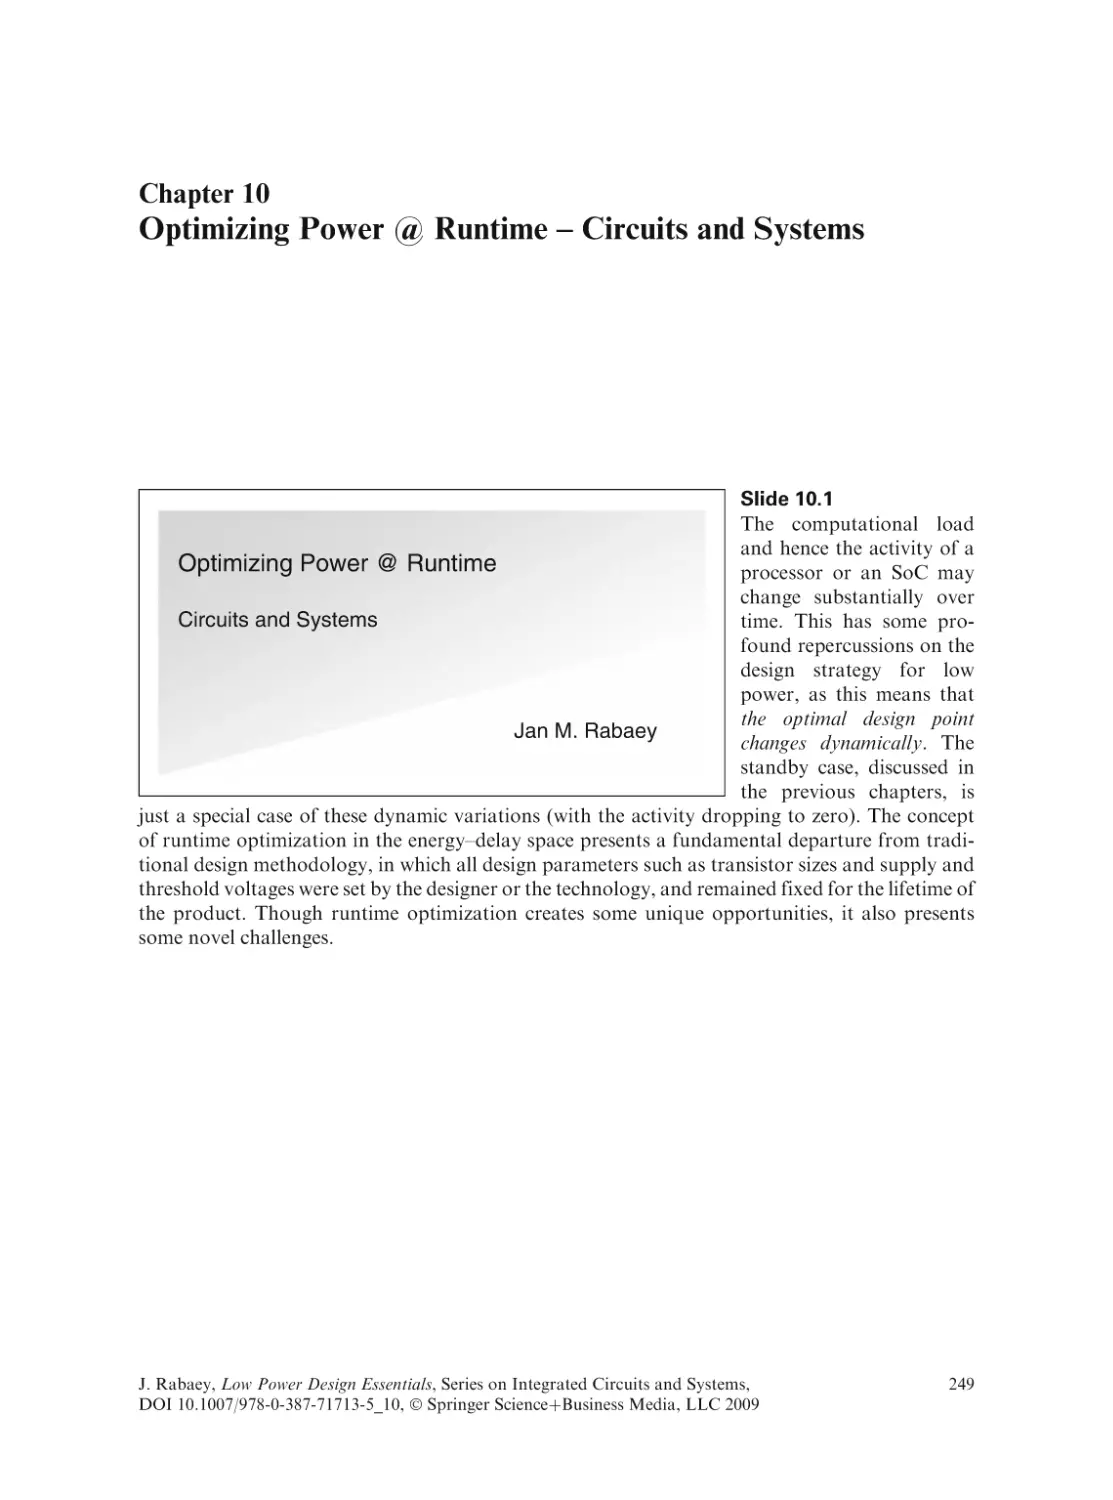 Optimizing Power @ Runtime - Circuits and Systems
Slide 10.1